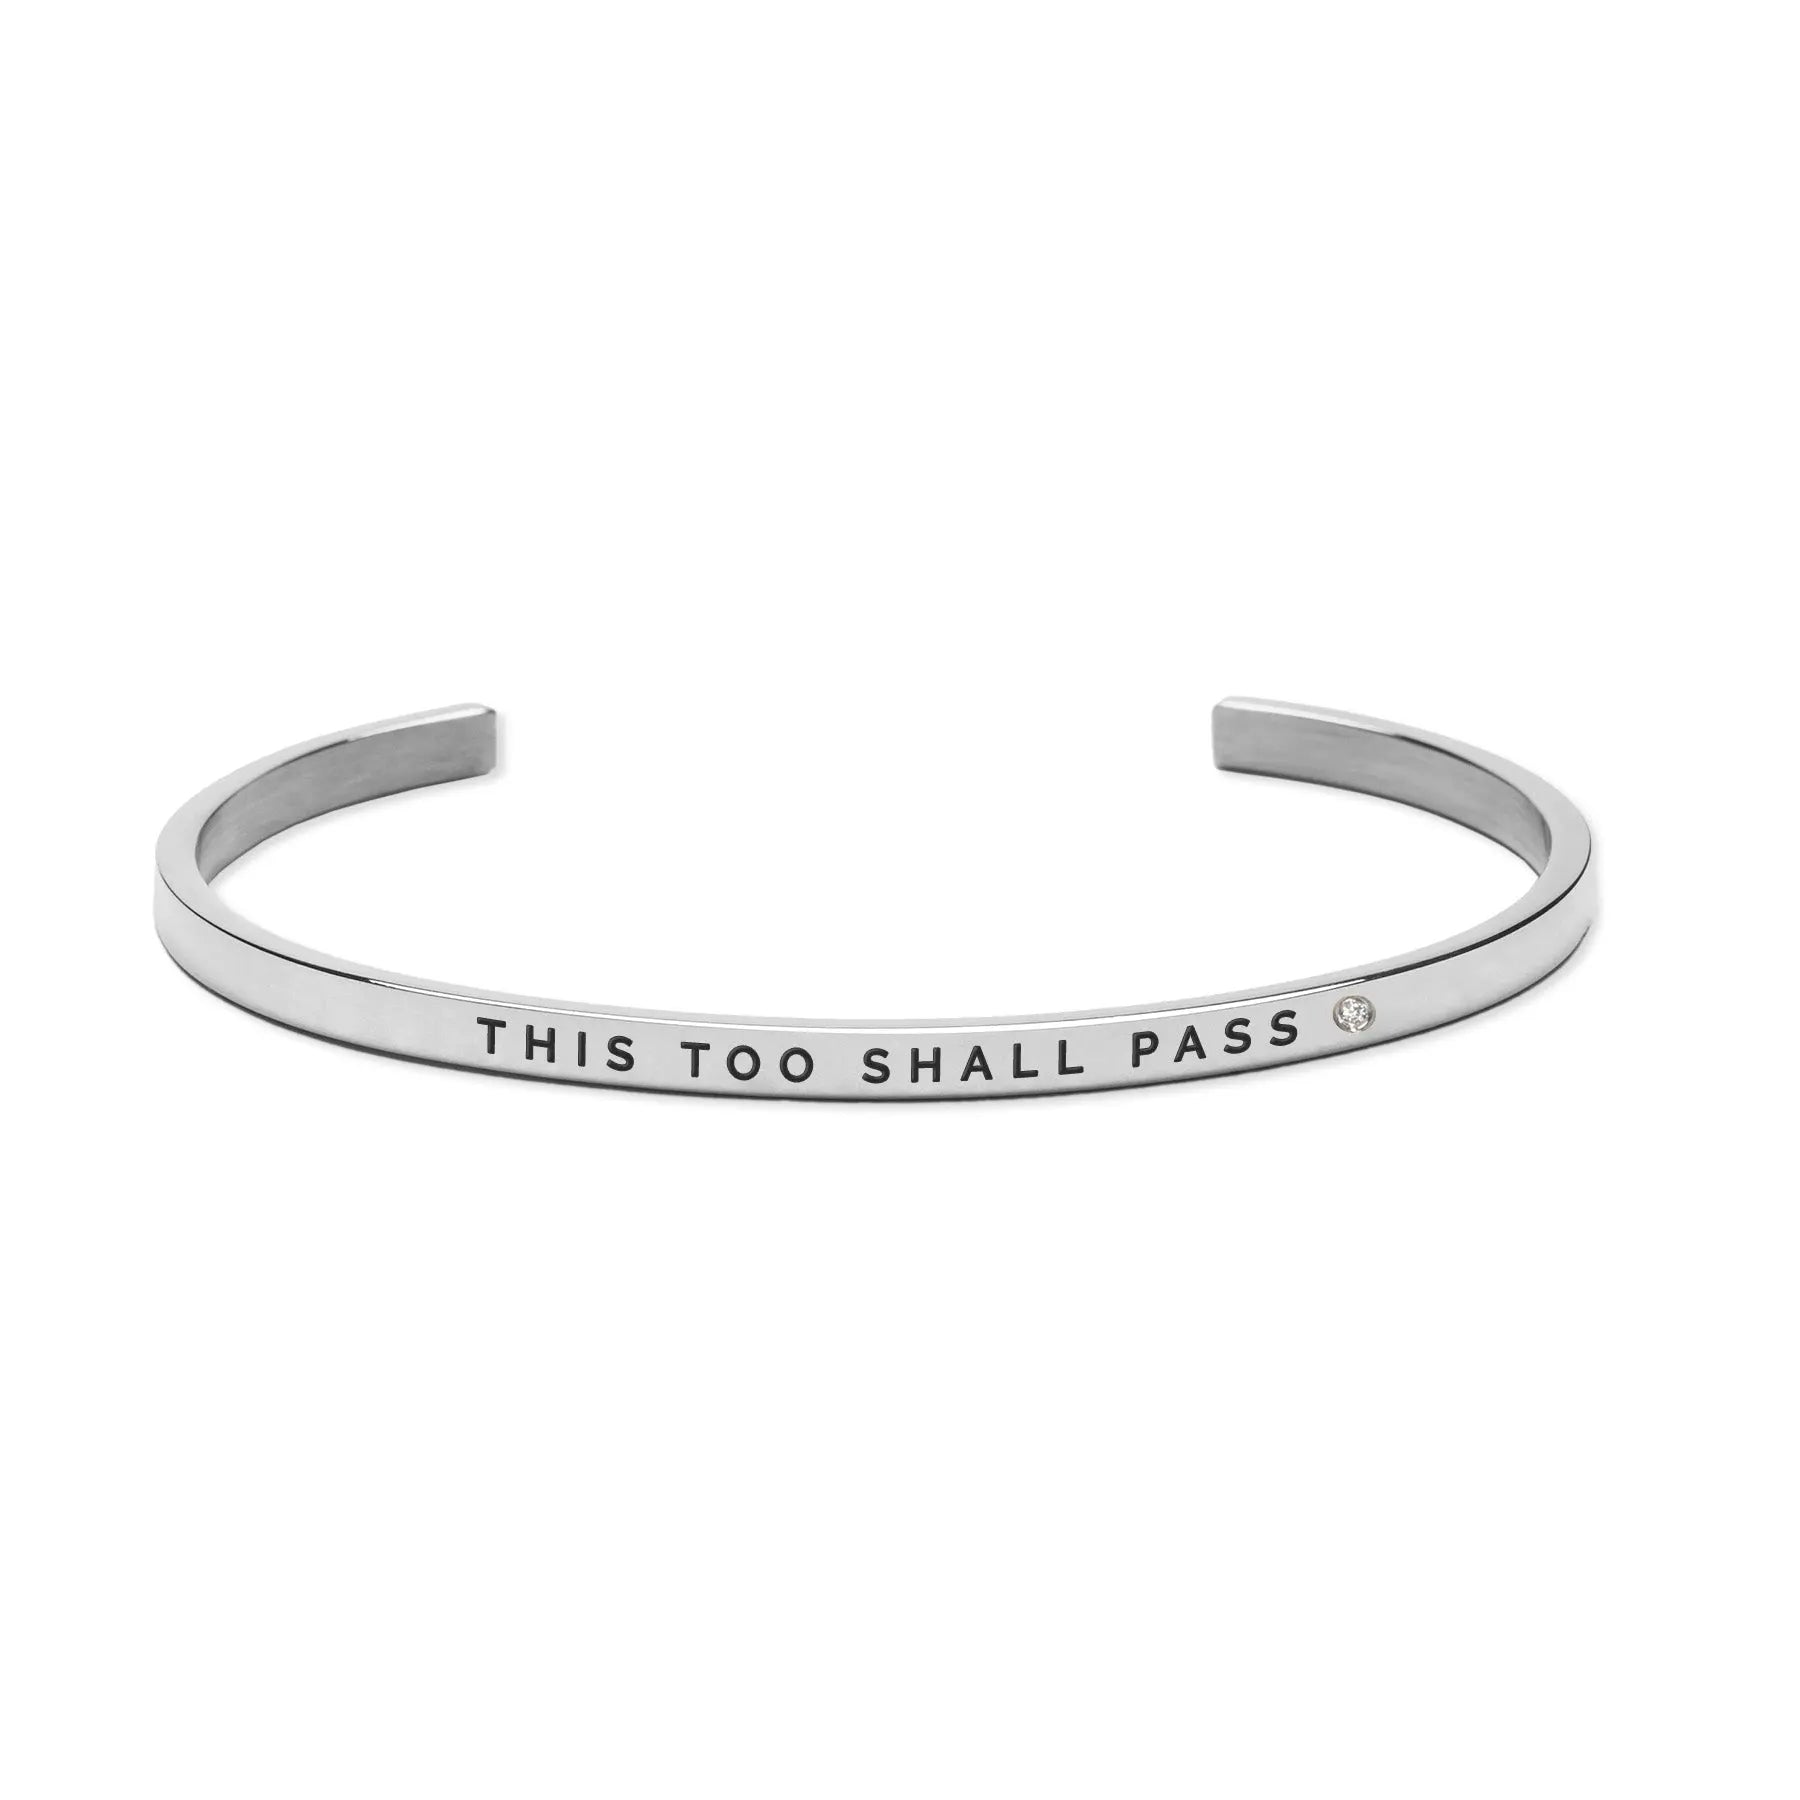 Adjustable silver bracelet with engraved This Too Shall Past message, 3mm width. Durable stainless steel, lightweight design for daily wear. Deep engraving ensures long-lasting appearance.